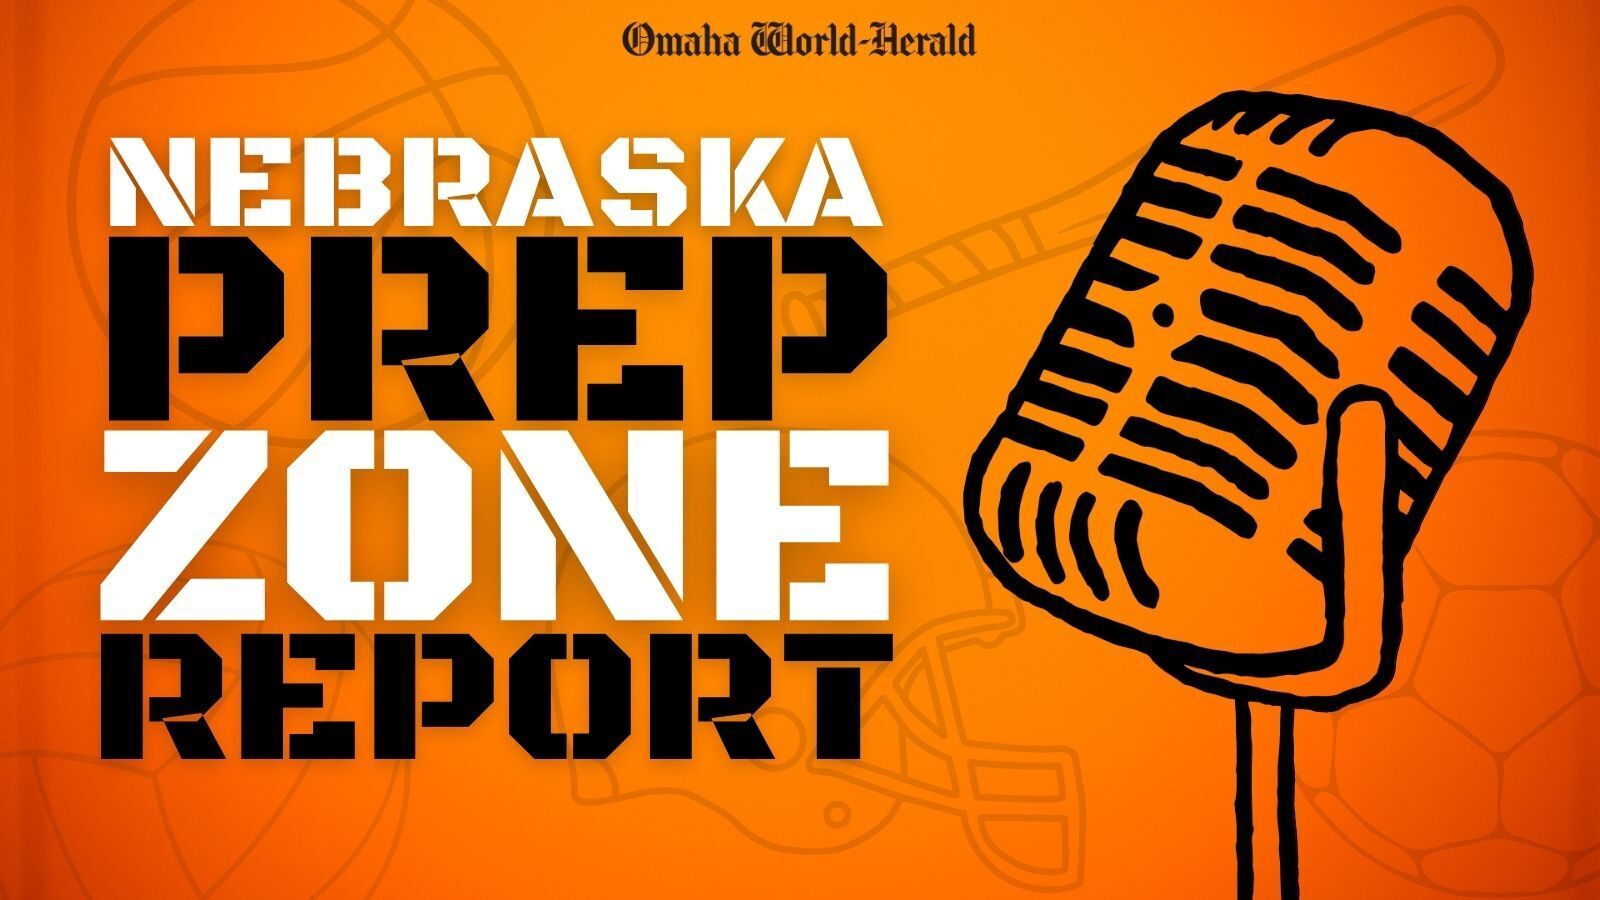 Prep Zone Report: Football playoff picture beginning to take shape ahead of 1 v. 2 matchups